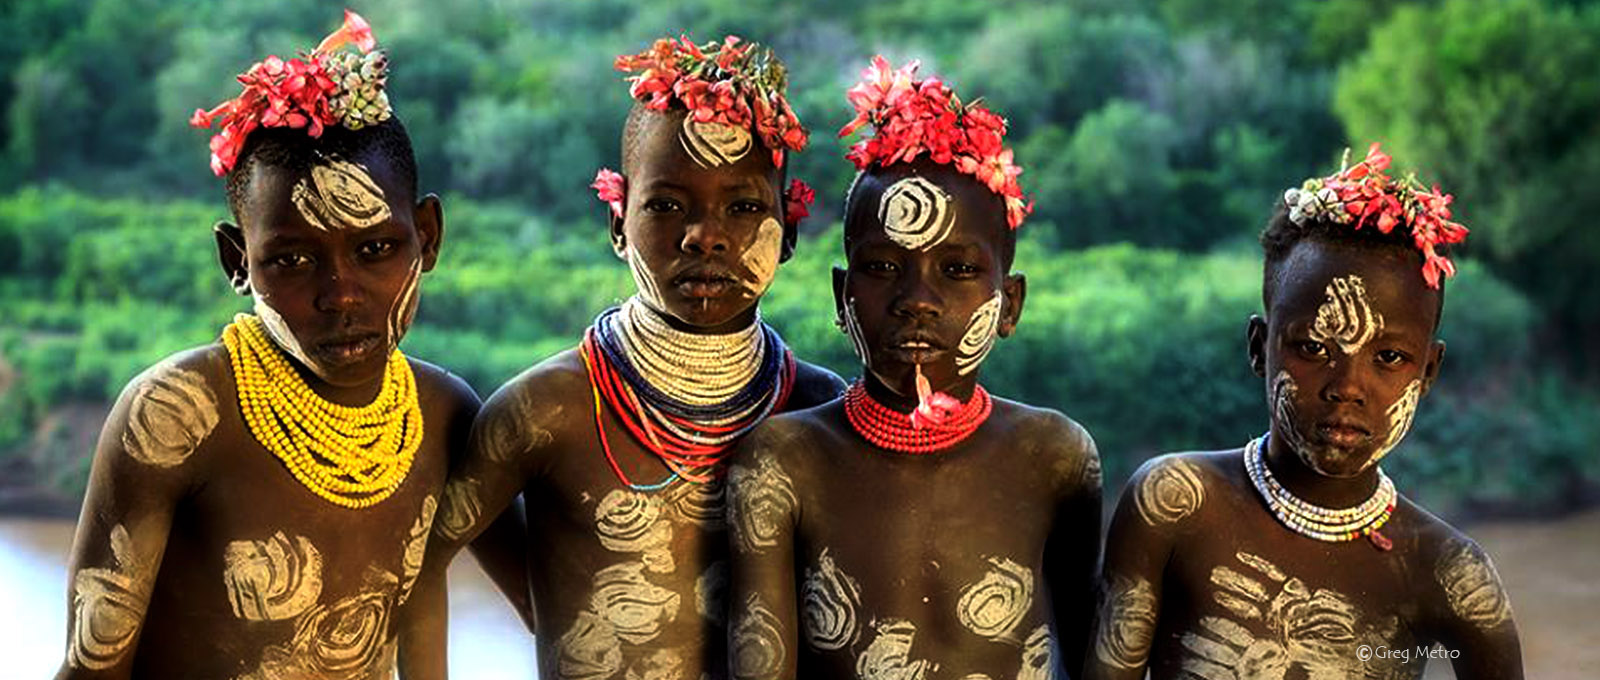 The Striking tribes of Omo valley